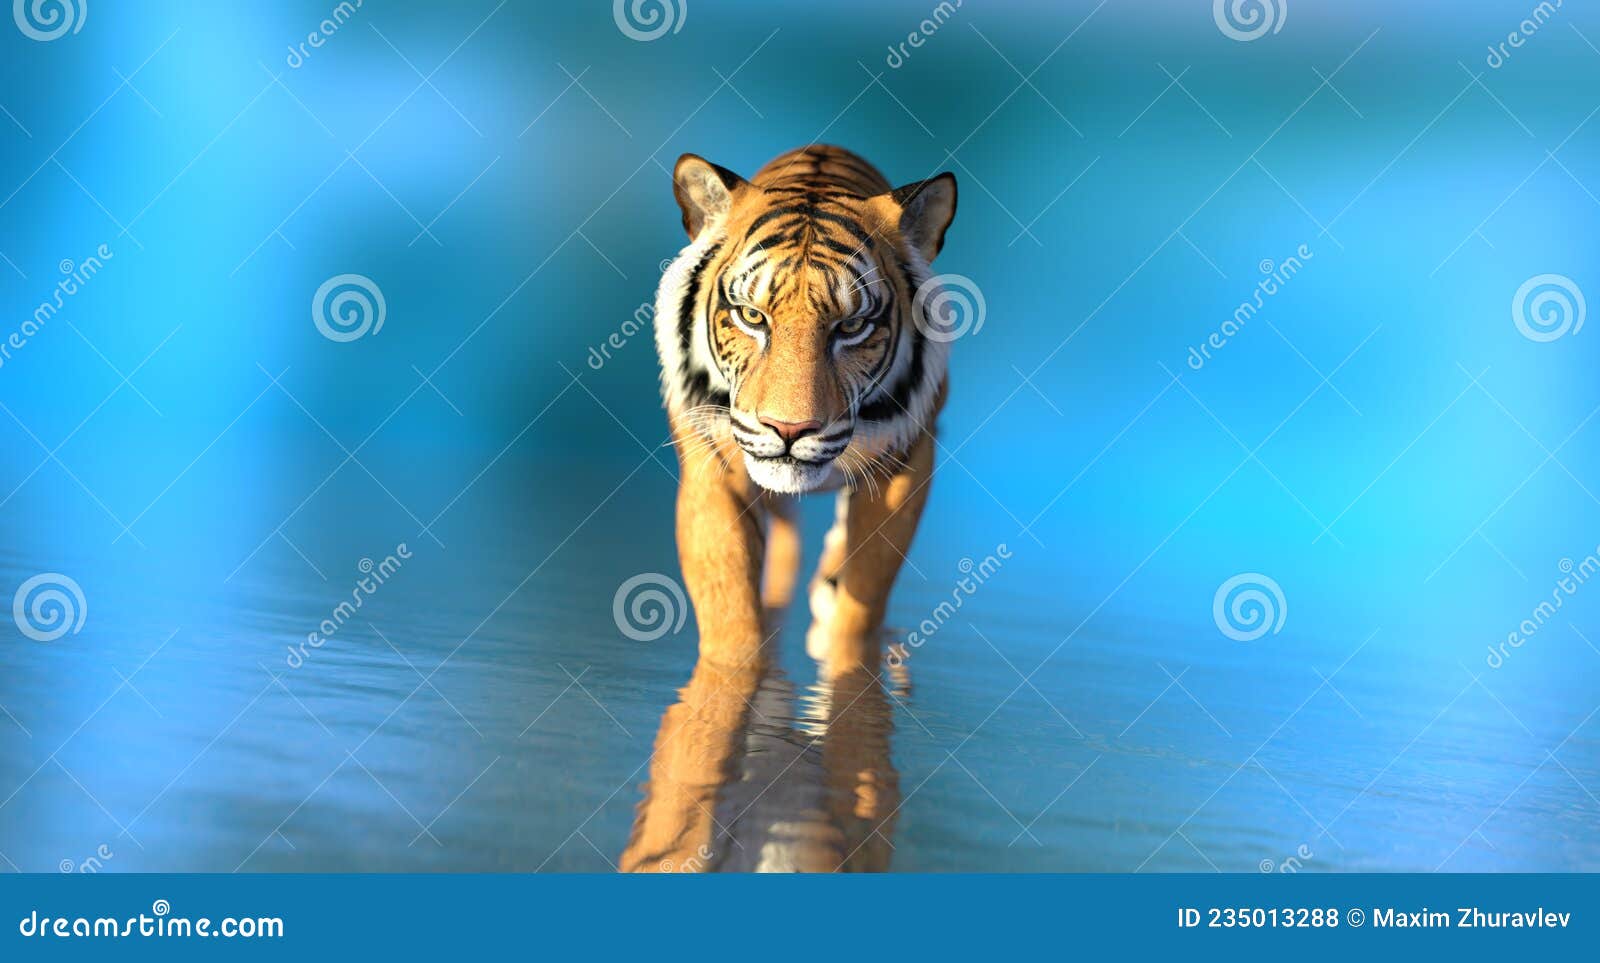 Tiger in Water on Blue Background 3d Illustration Stock ...